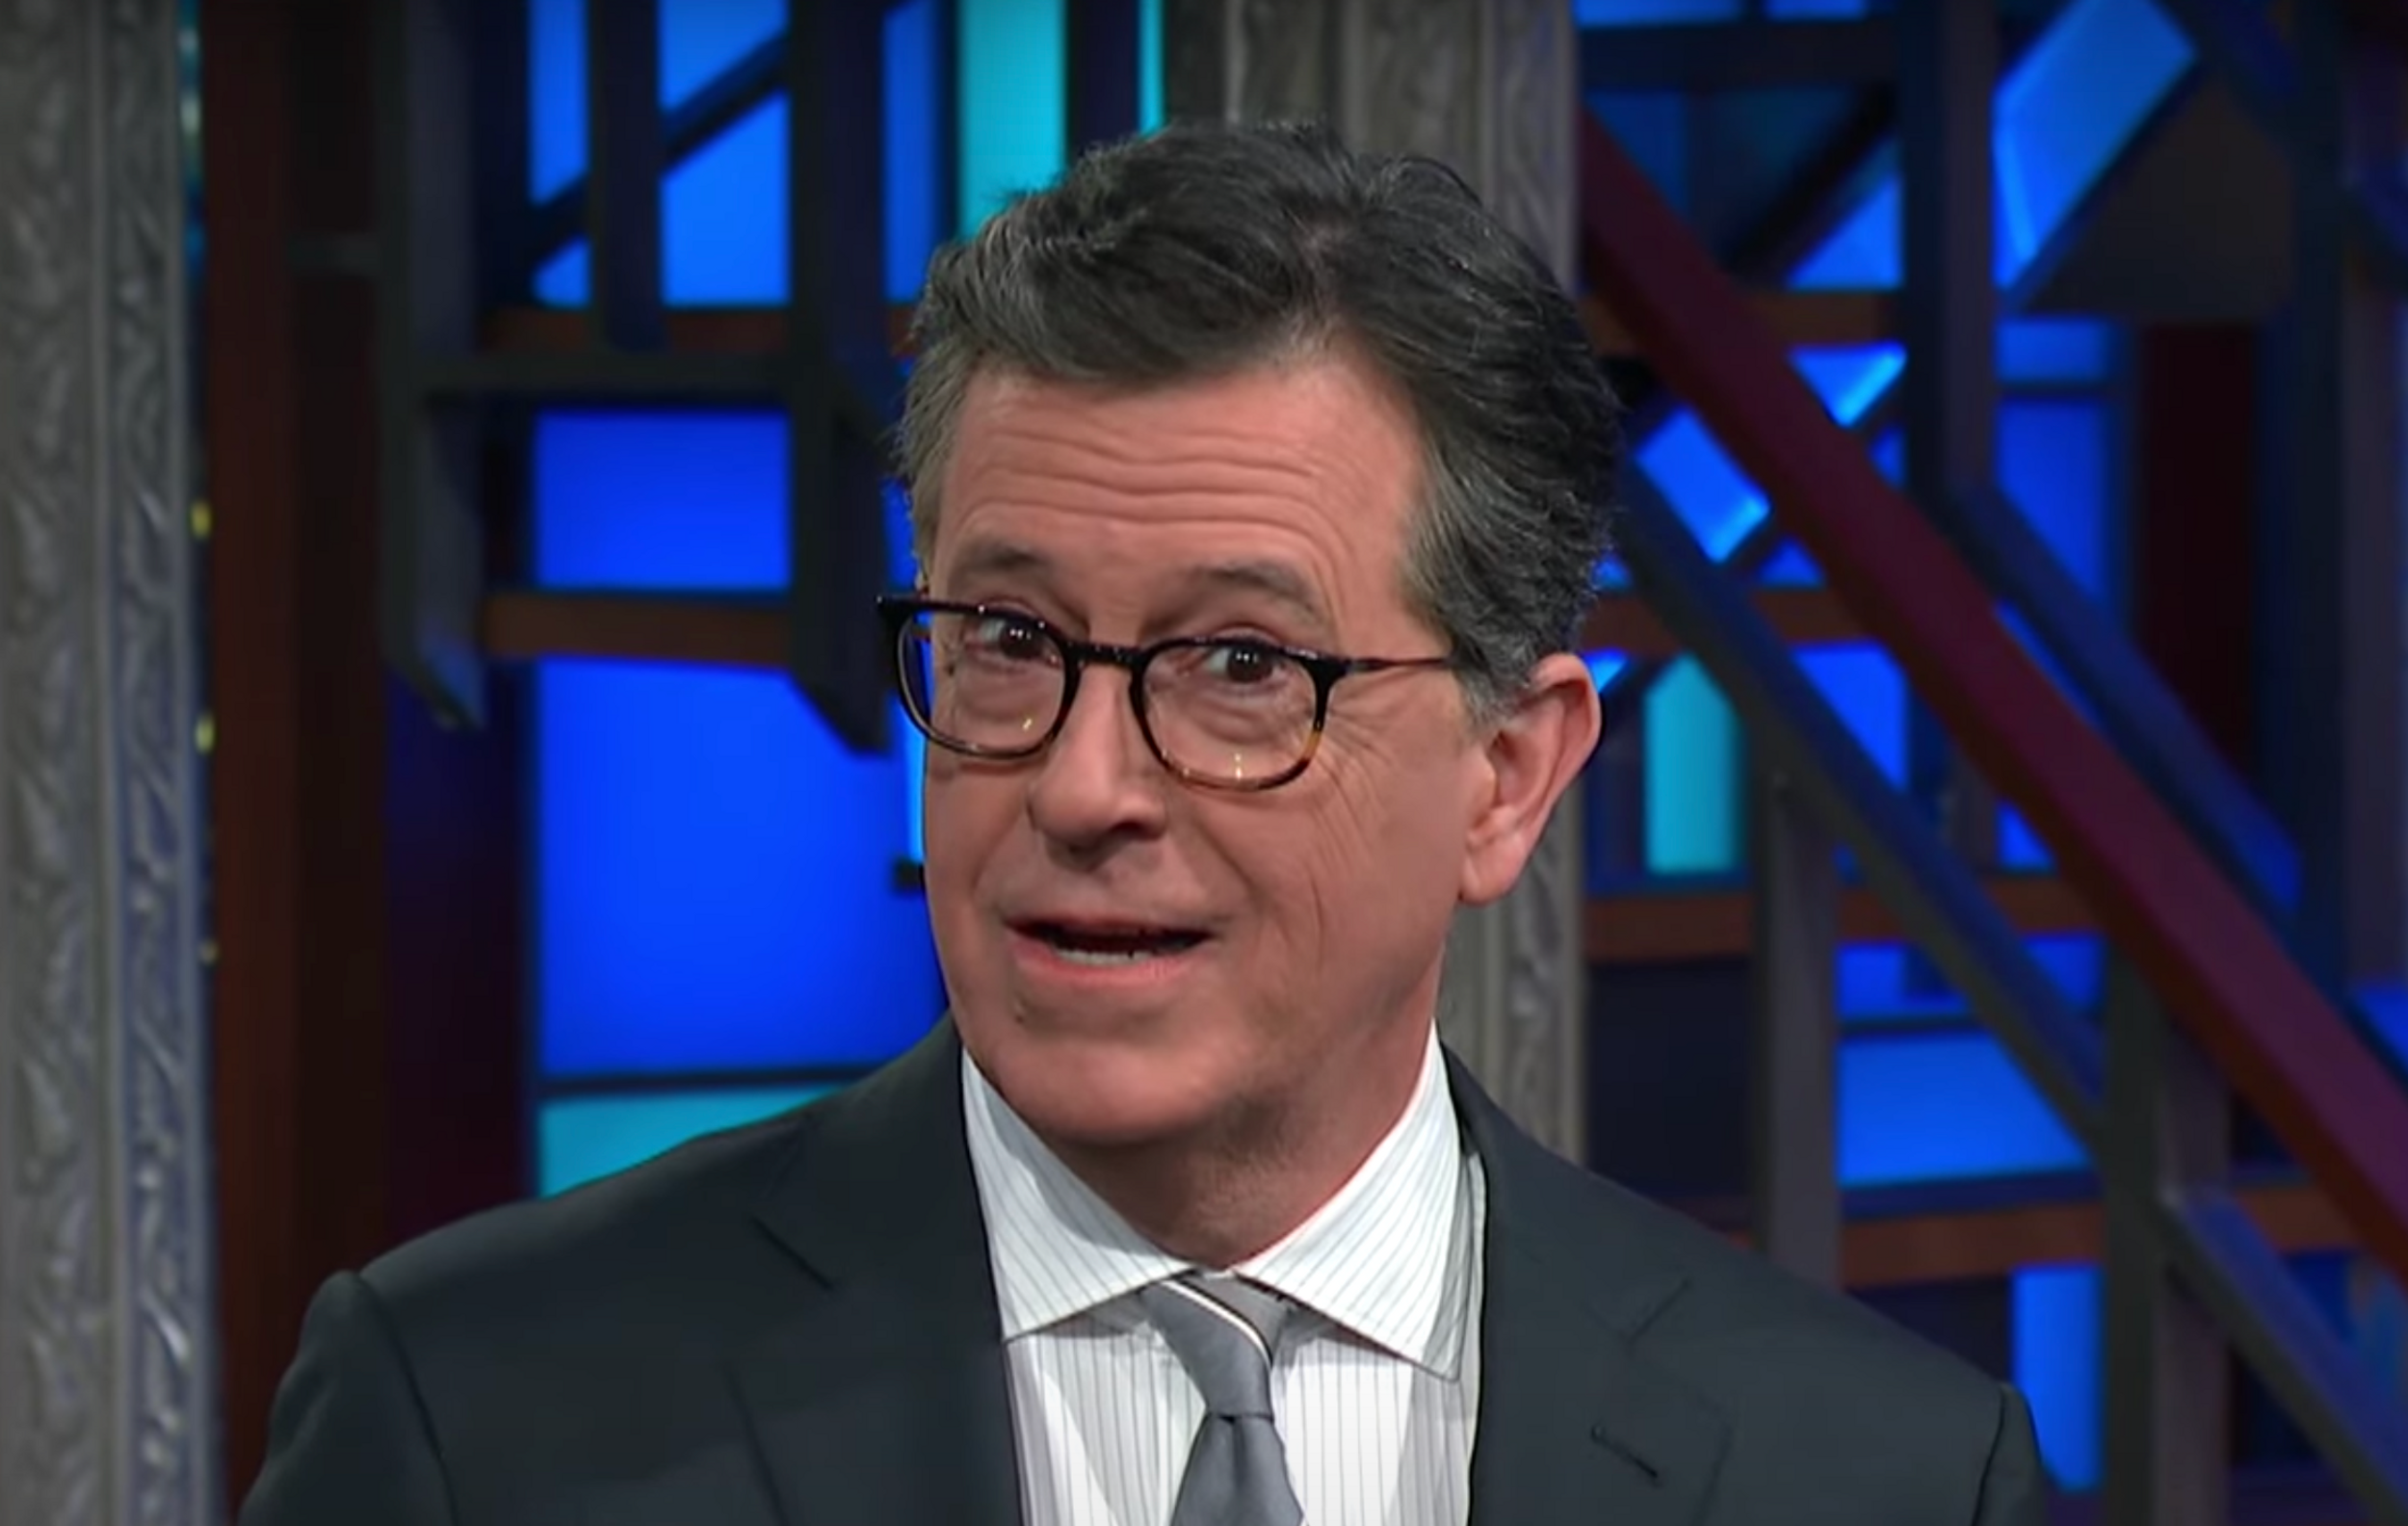 CBS Had to Bleep Out Colbert's Reaction to the Network Hiring Trump's Ex-Chief of Staff as On-Air Analyst